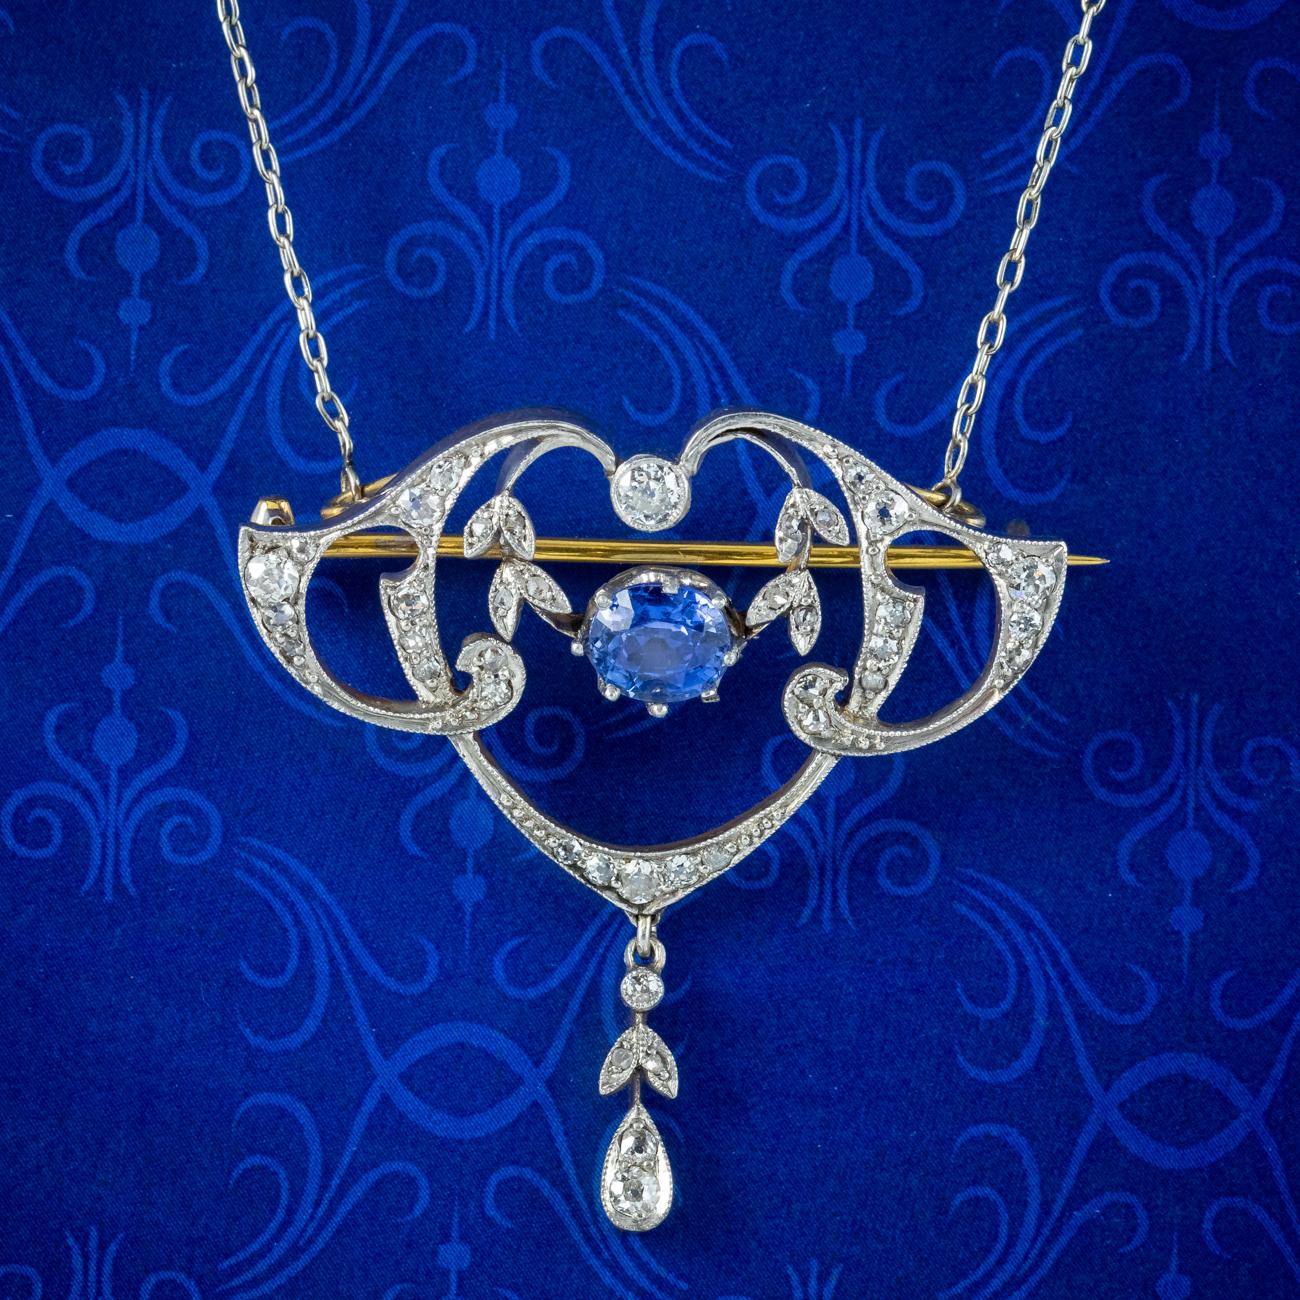 An elegant antique Edwardian lavaliere necklace adorned with a beautiful Art Nouveau pendant decorated with twinkling old cut diamonds (approx. 0.80ct total) and a vibrant blue cushion cut Ceylon sapphire at its heart weighing approx. 1ct. It’s